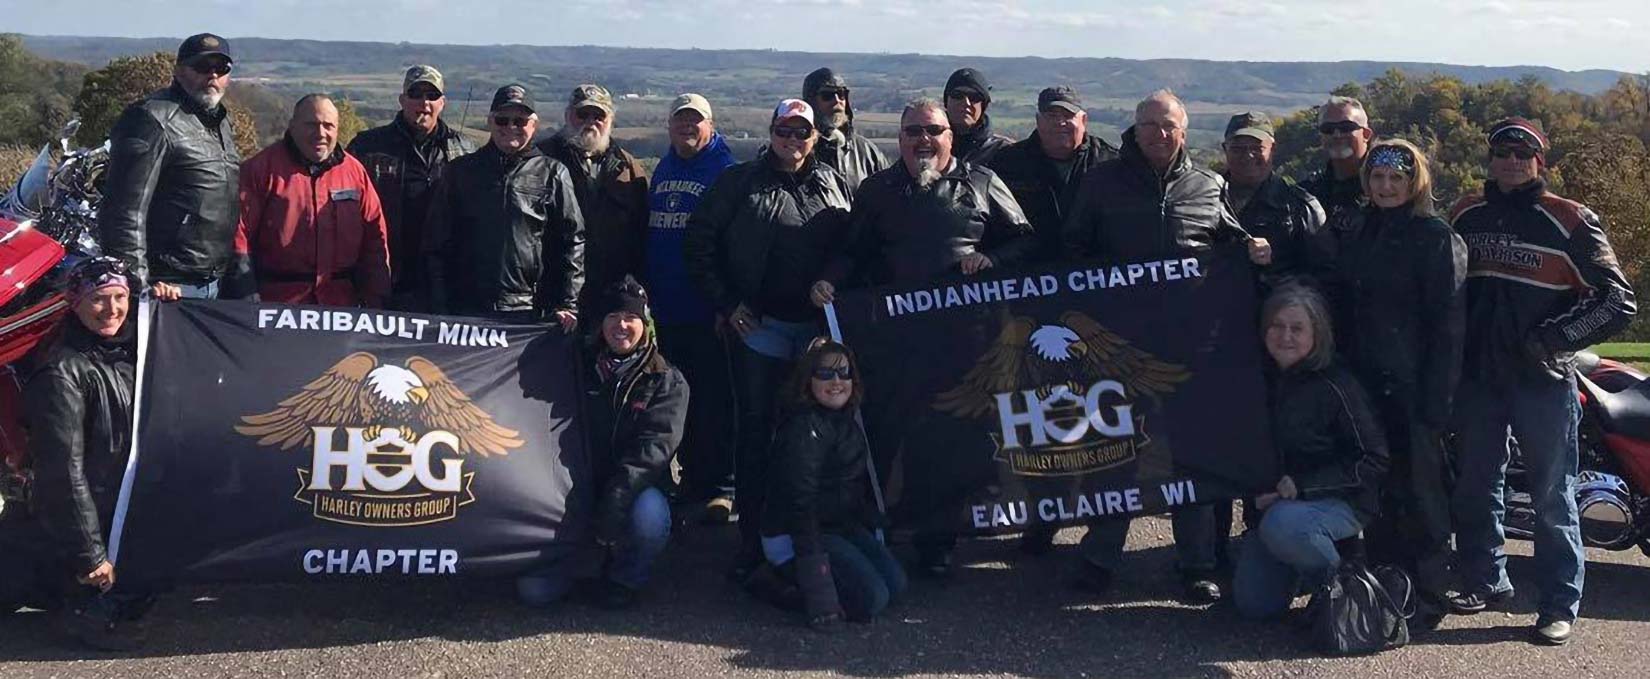 A group of members wearing riding gear stand behind a HOG banner.